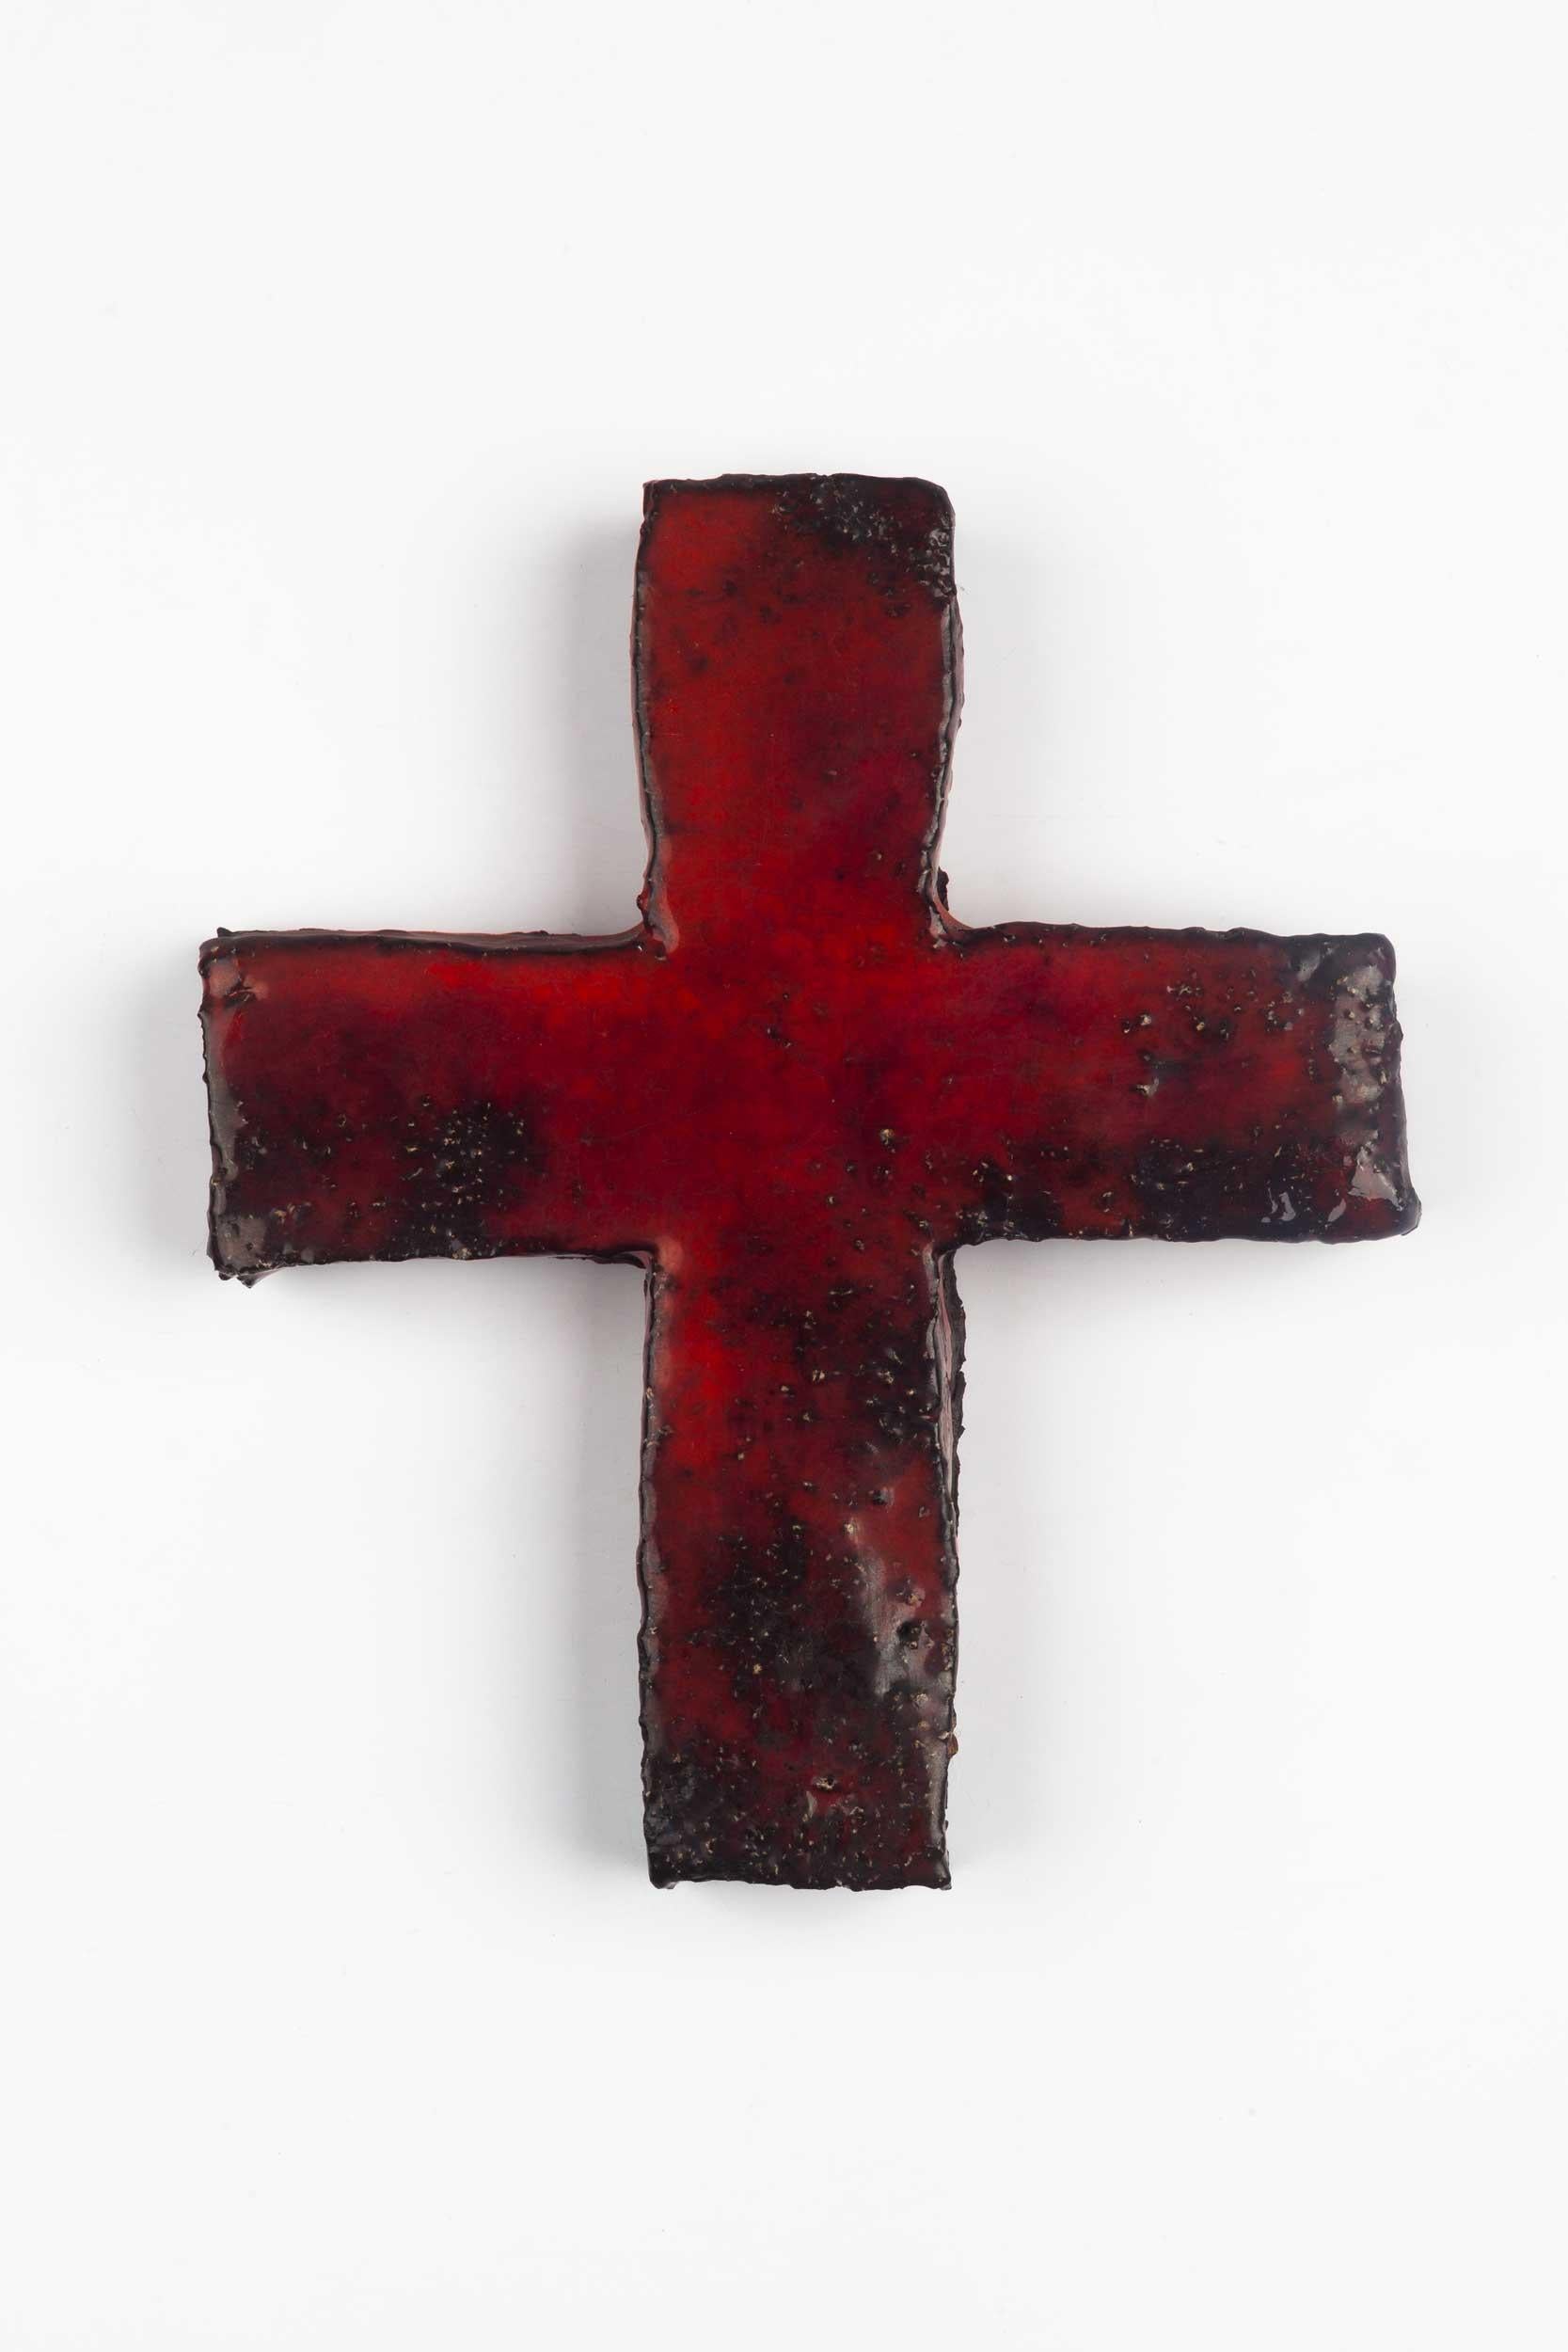 Midcentury European Wall Cross, Textured Ceramic, Red, Black, 1970s In Good Condition For Sale In Chicago, IL